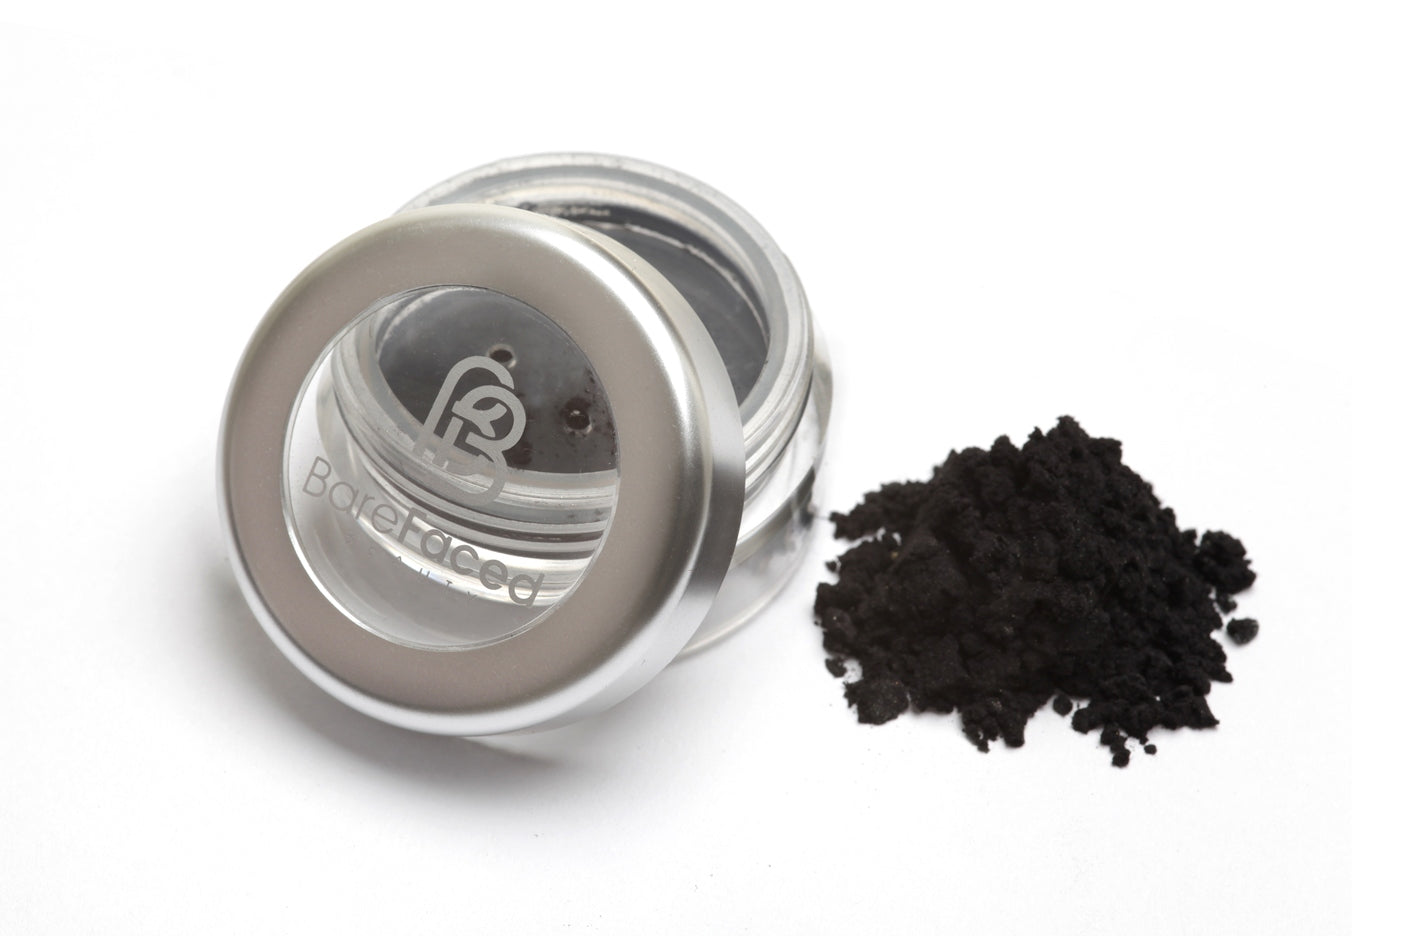 A small round pot of mineral eyeshadow, with a swatch of the powder next to it showing a smokey black matt shade